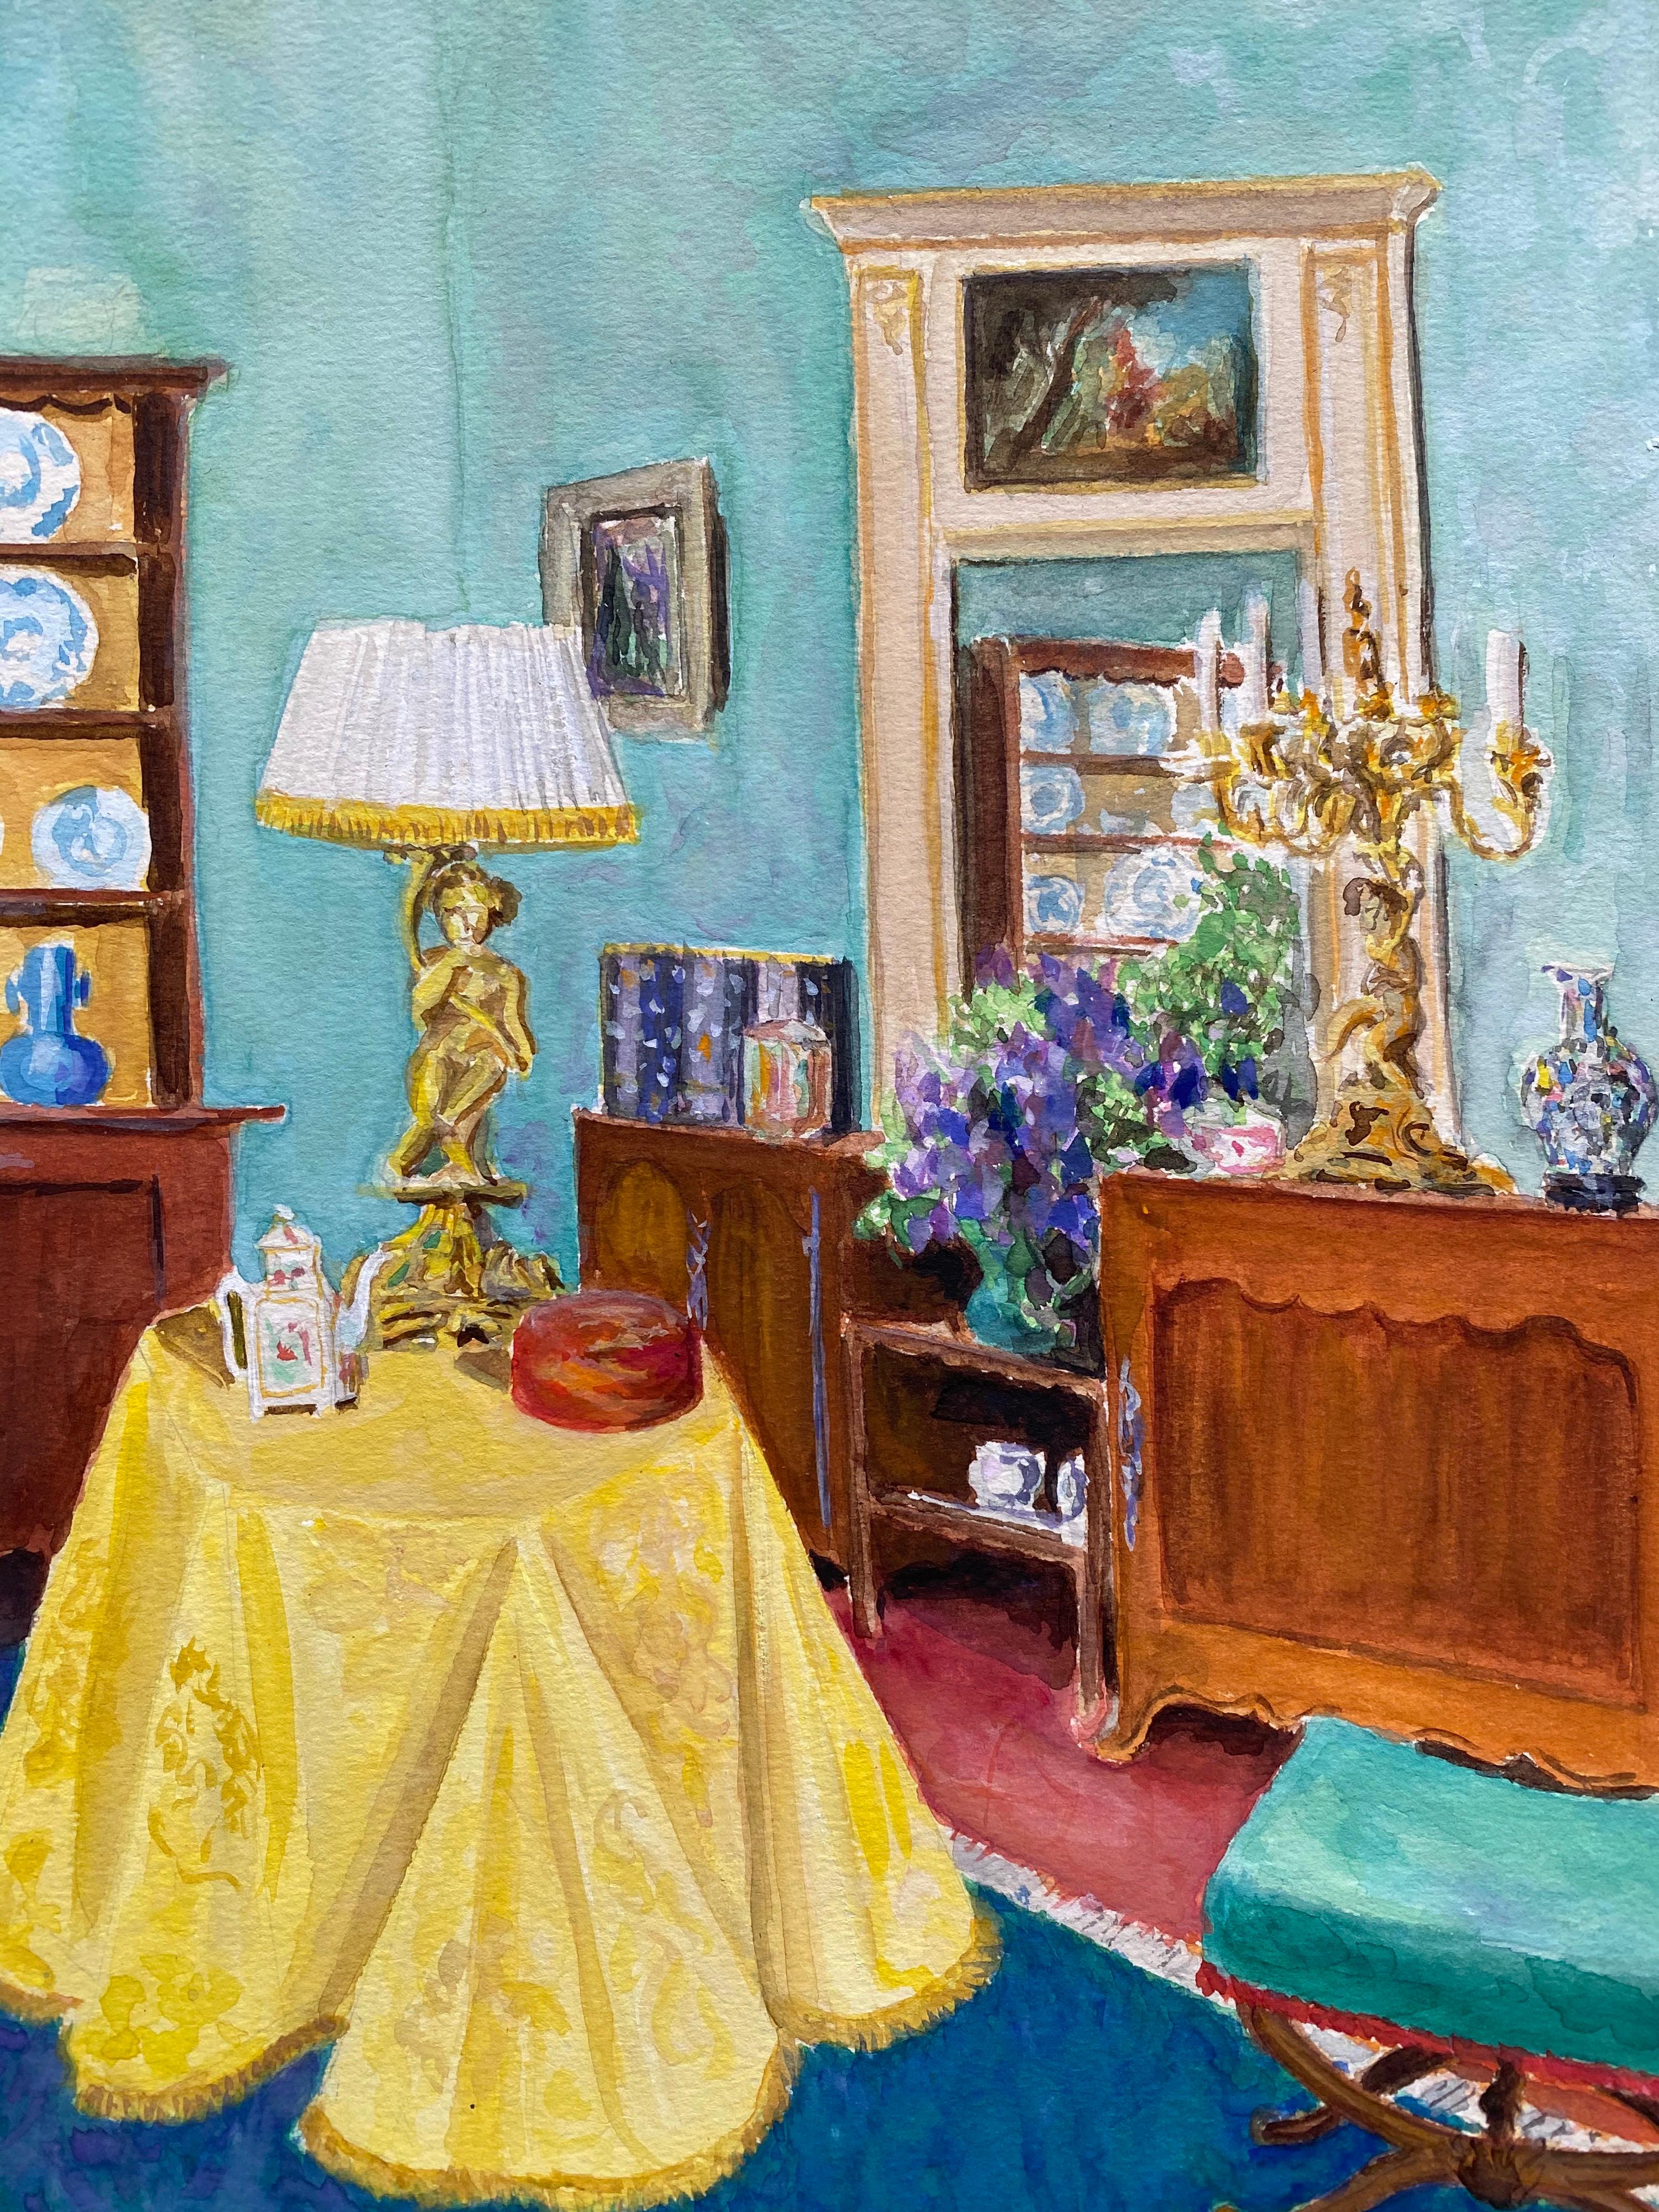 Unknown Interior Art - Mid 20th Century French Modernist Painting - Colourful Interior of Elegant Room